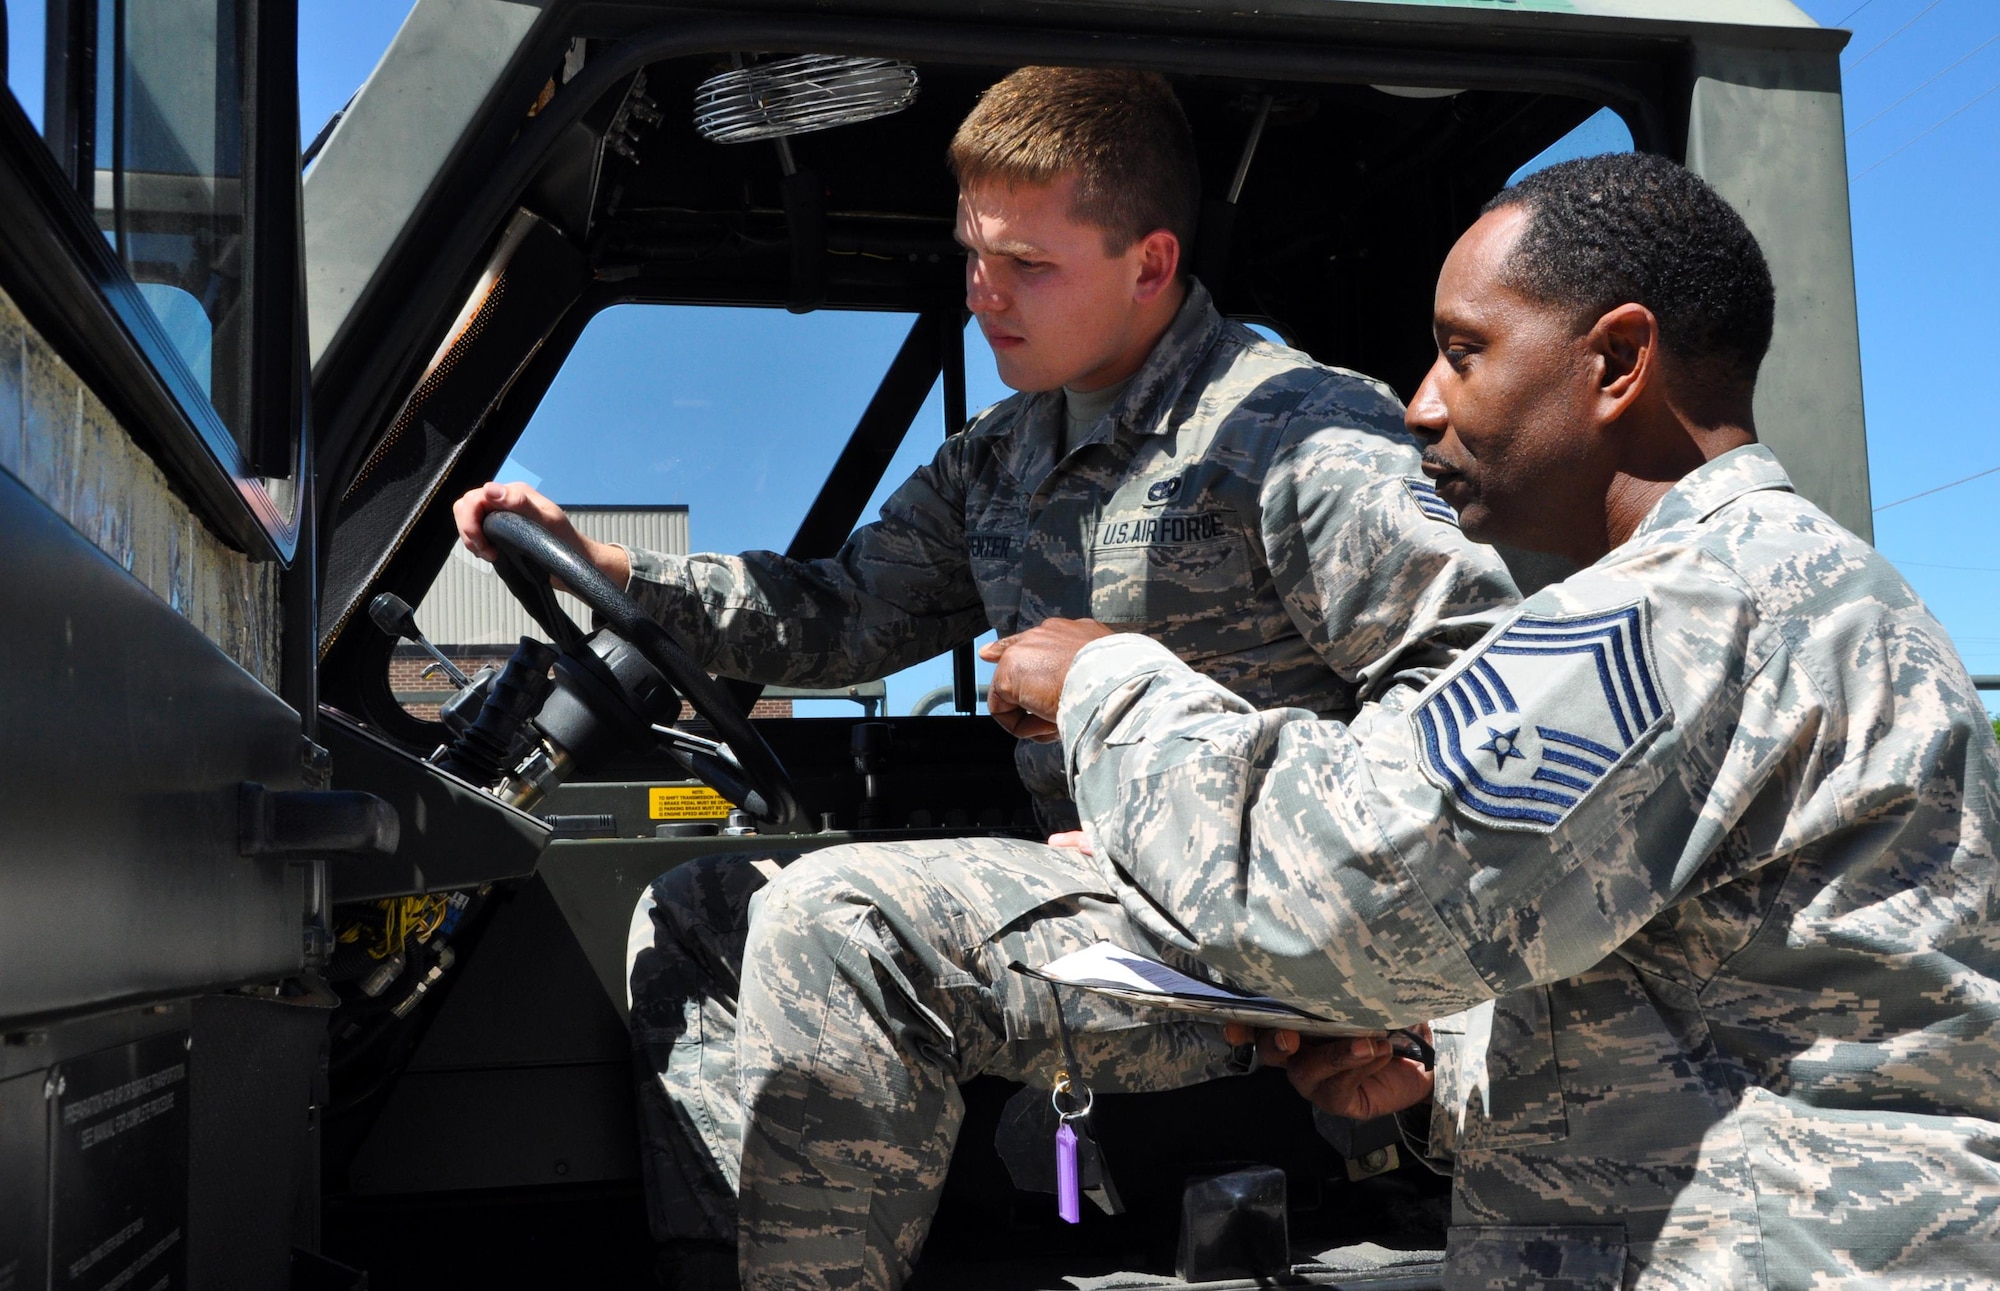 Chief Master Sgt. Lee Green, 80th Aerial Port Squadron cargo specialist, and Senior Airman Daniel Carpenter, 80th APS air transportation journeyman, review functions inside a K Loader, a series of loading truck used at Dobbins Air Reserve Base. Carpenter will be going to the Air Force Academy in July and many fellow Airmen say Carpenter has been preparing to be a pilot since he was very young. (U.S. Air Force photo by Senior Airman Lauren Douglas)